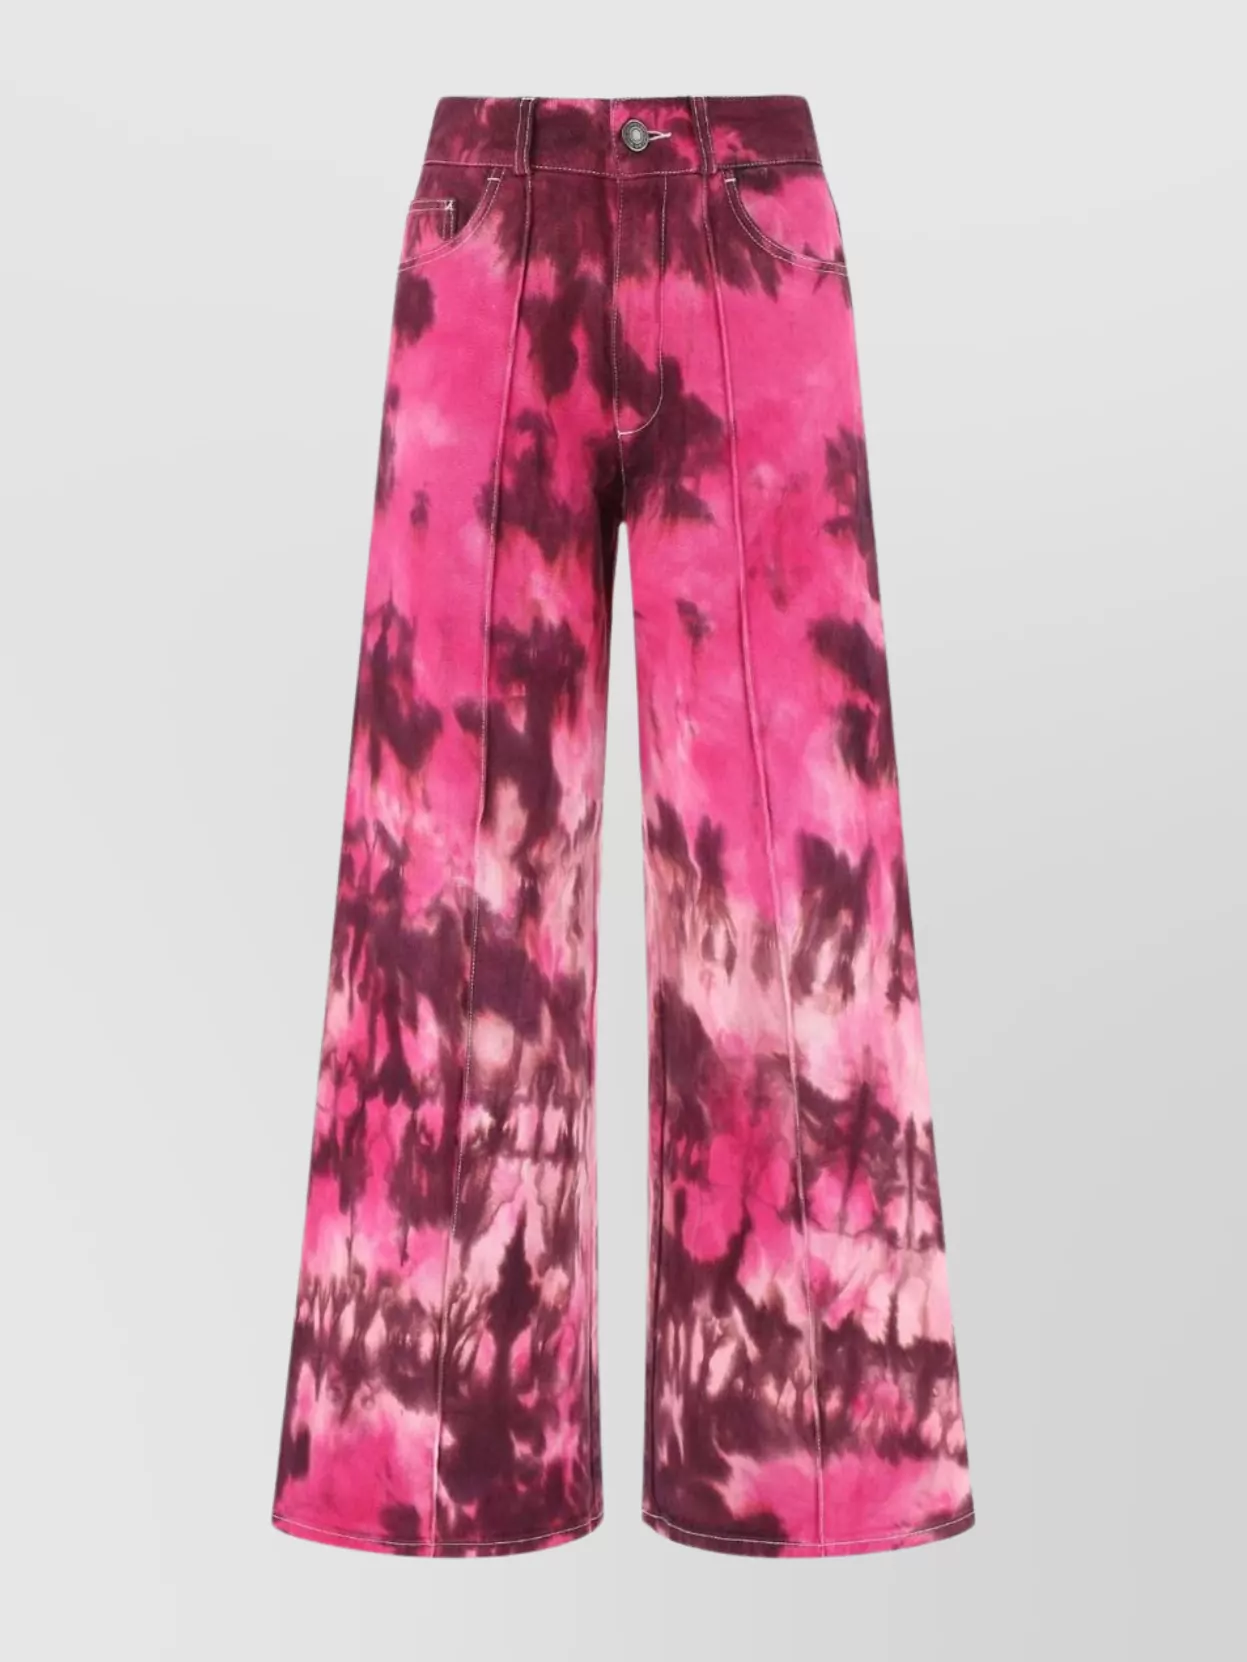 Shop Ami Alexandre Mattiussi Large Fit Denim Trousers With Wide Leg And Tie-dye Pattern